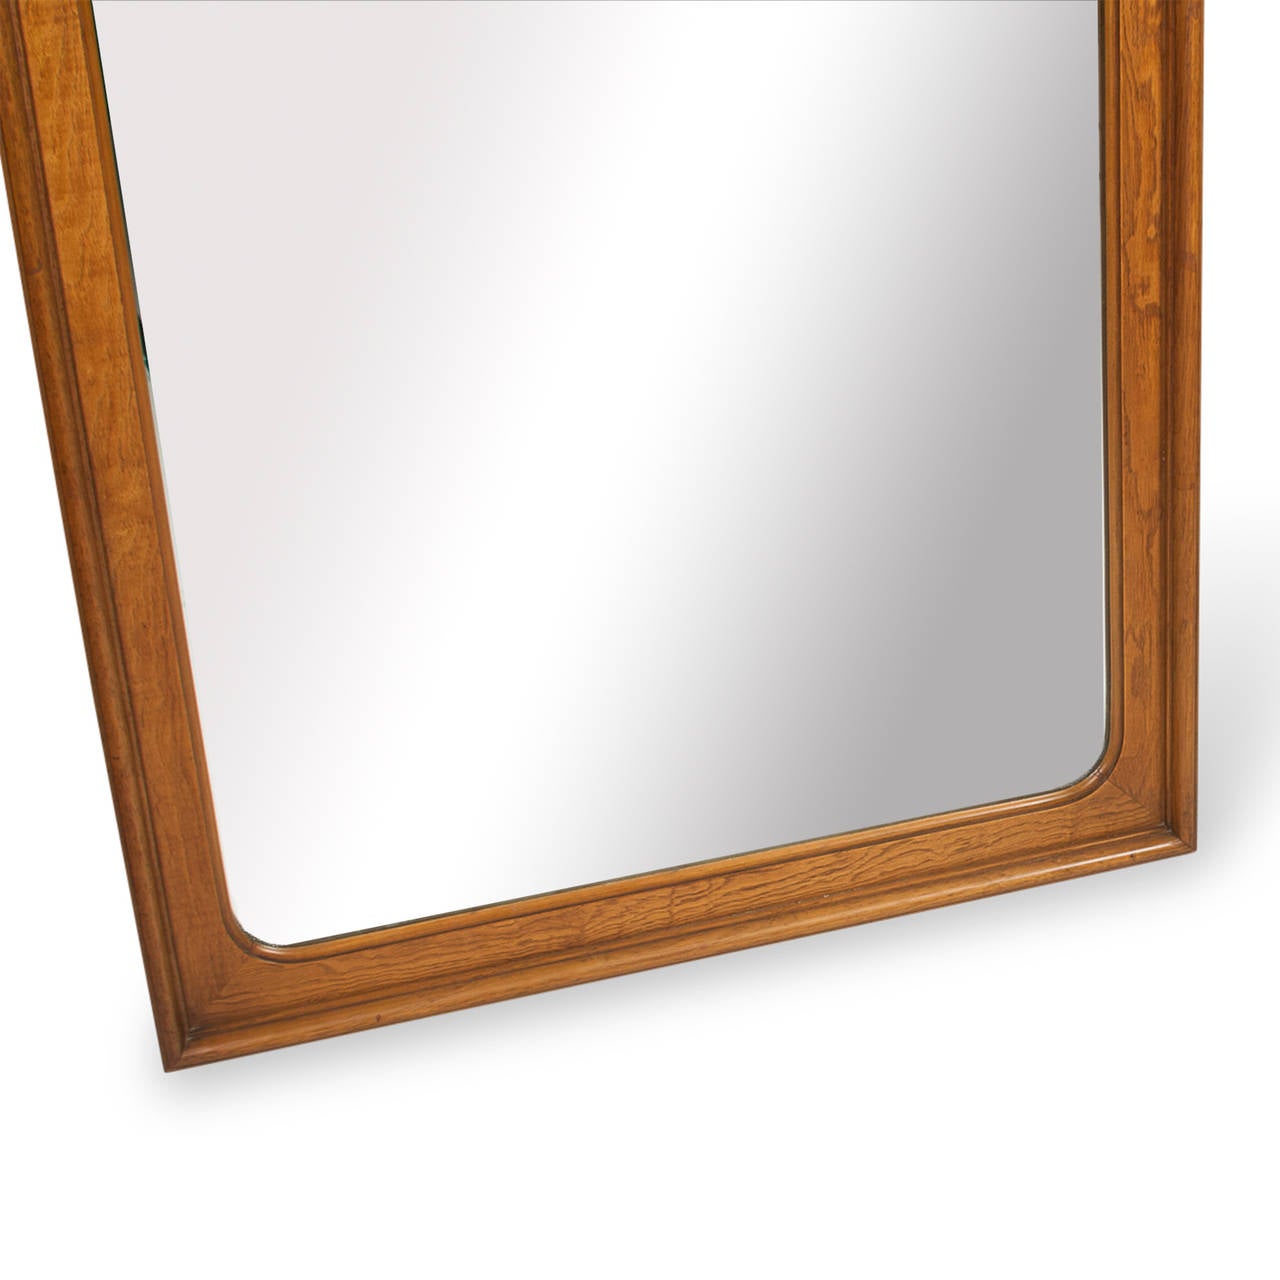 1960s Maple Frame Mirror In Excellent Condition For Sale In Brooklyn, NY